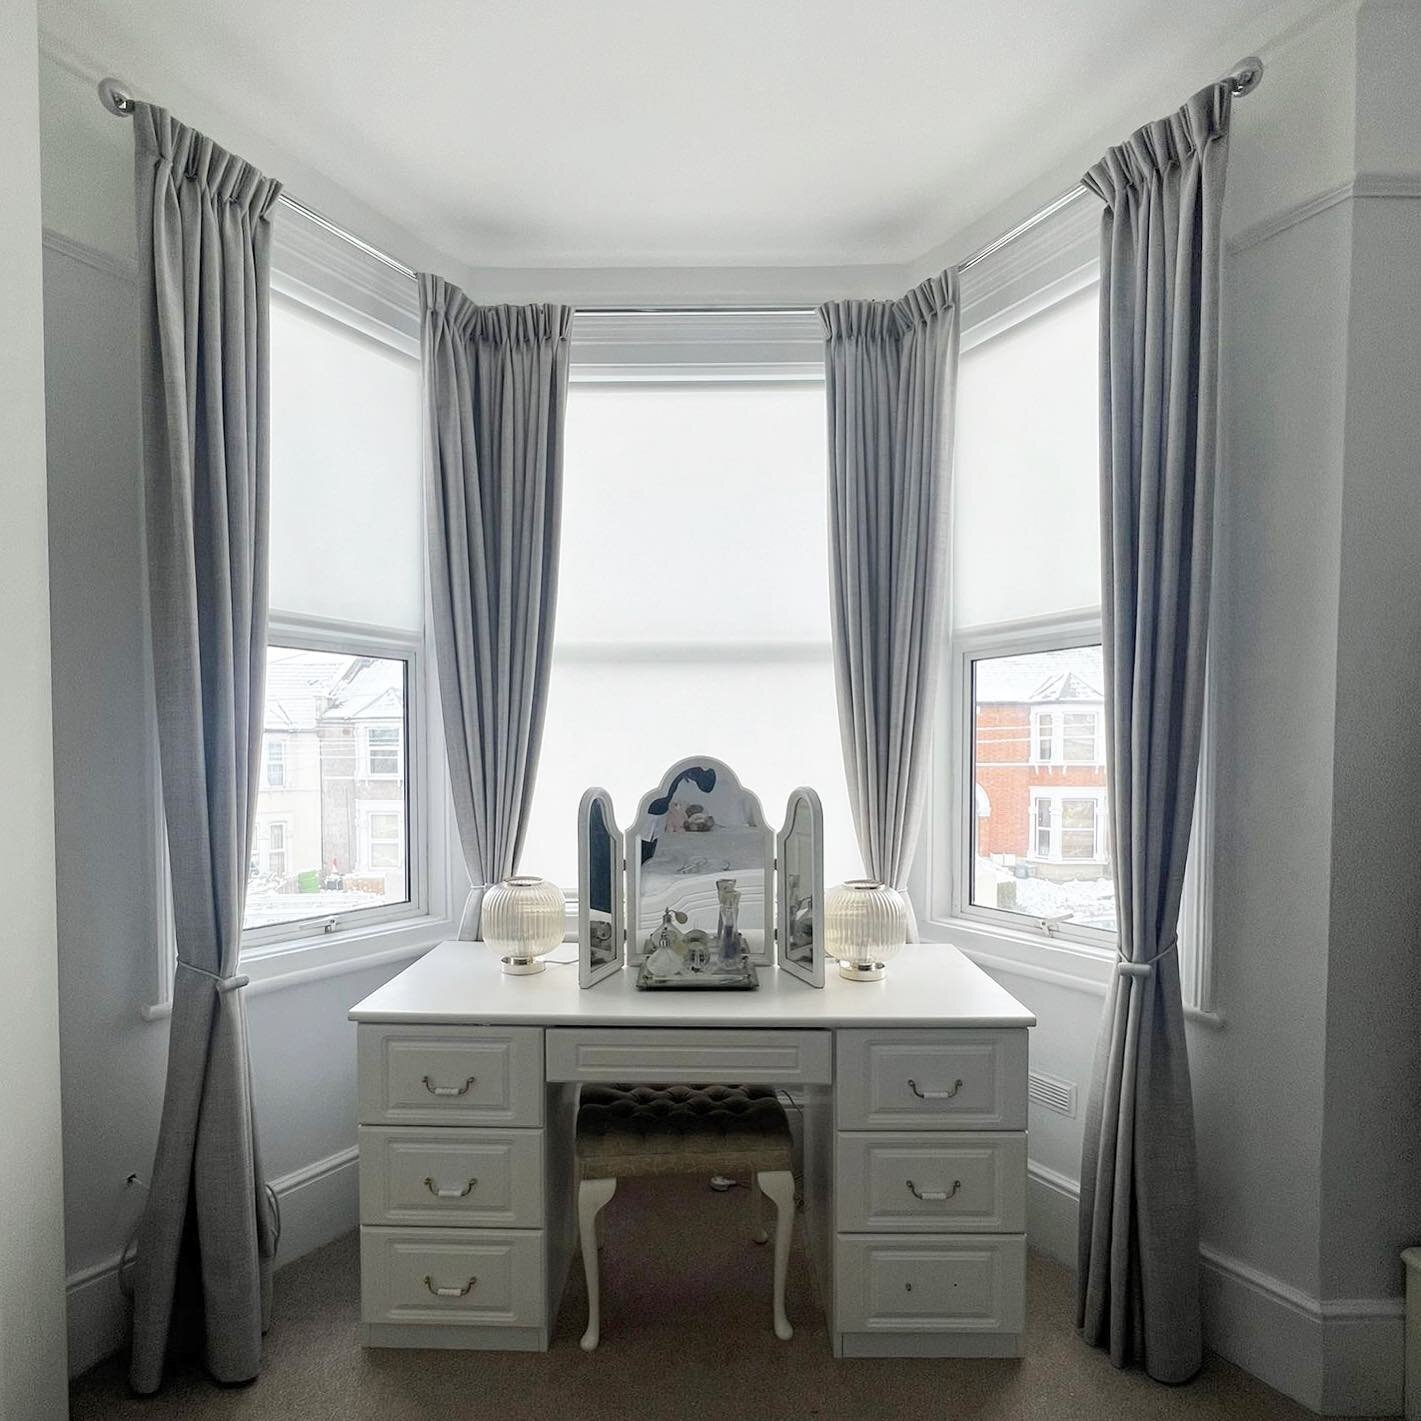 Elegant combination of voile blinds and blackouts curtains on a bay window transformed everyday setting to a scene fit for a Snow White&rsquo;s Palace ❄️❄️❄️. . #curtainsup #curtains #interiordesign #curtains_accessories #curtains_fabrics #curtainsdr